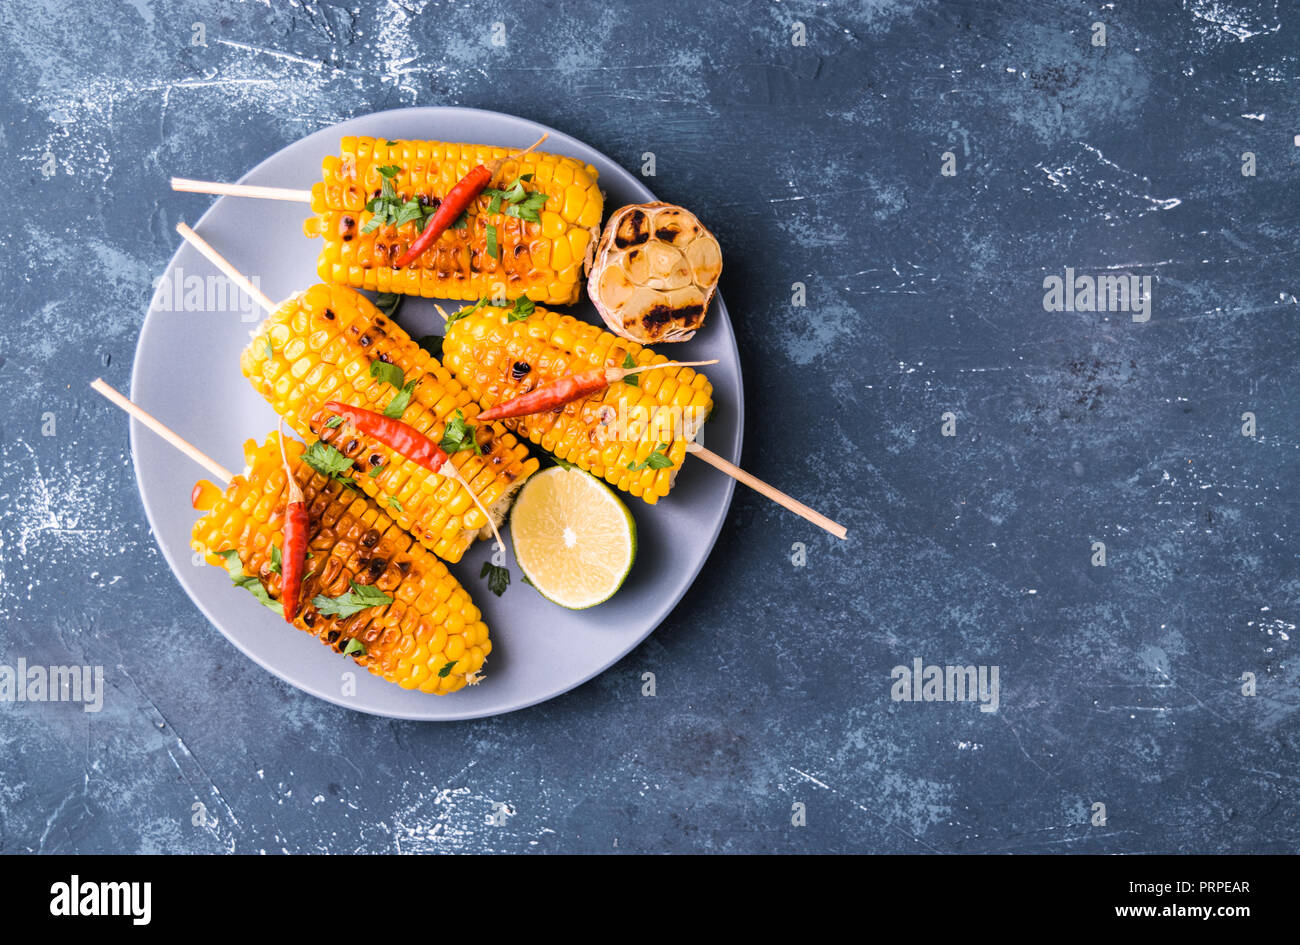 Grilled corn cobs. Delicious summer snack. With parsley, chili peppers, lime and grilled garlic. Served on blue plate. Dark blue stone concrete backgr Stock Photo